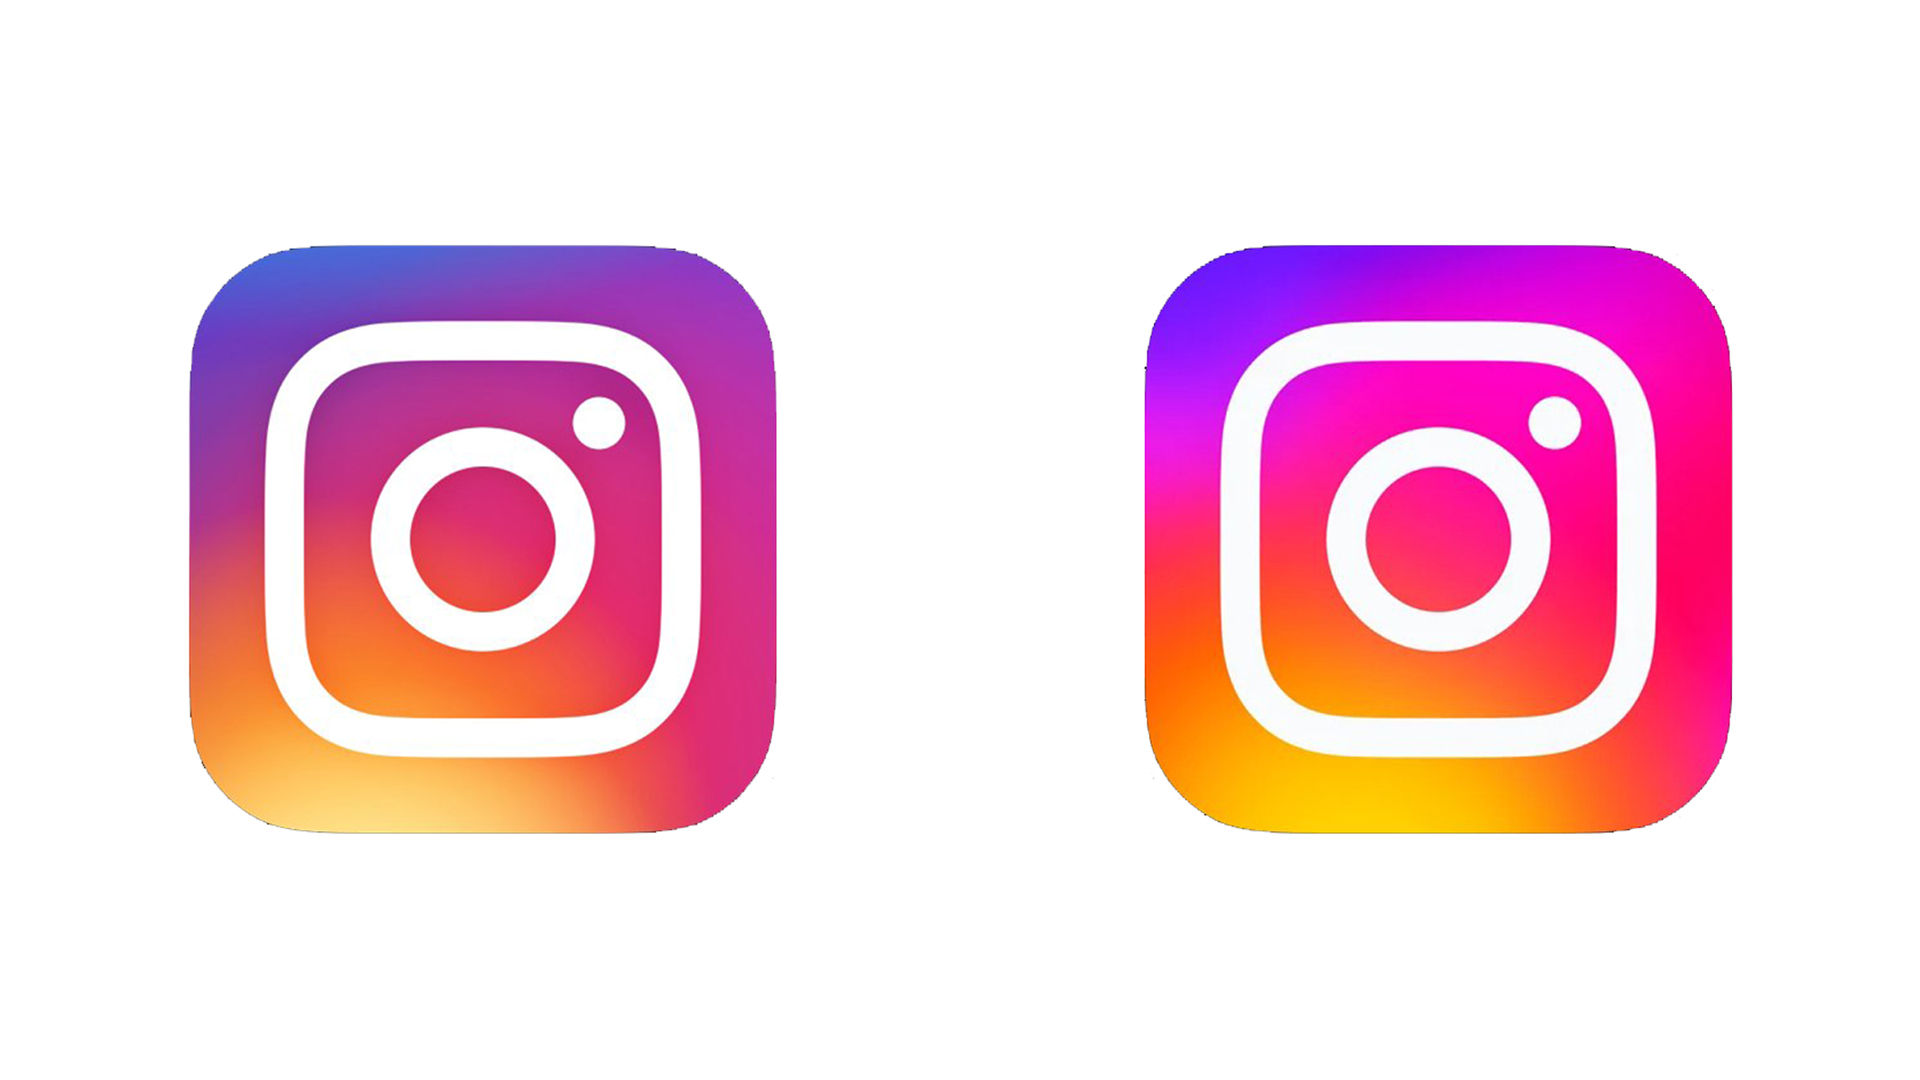 The new Instagram logo and font are dividing the internet